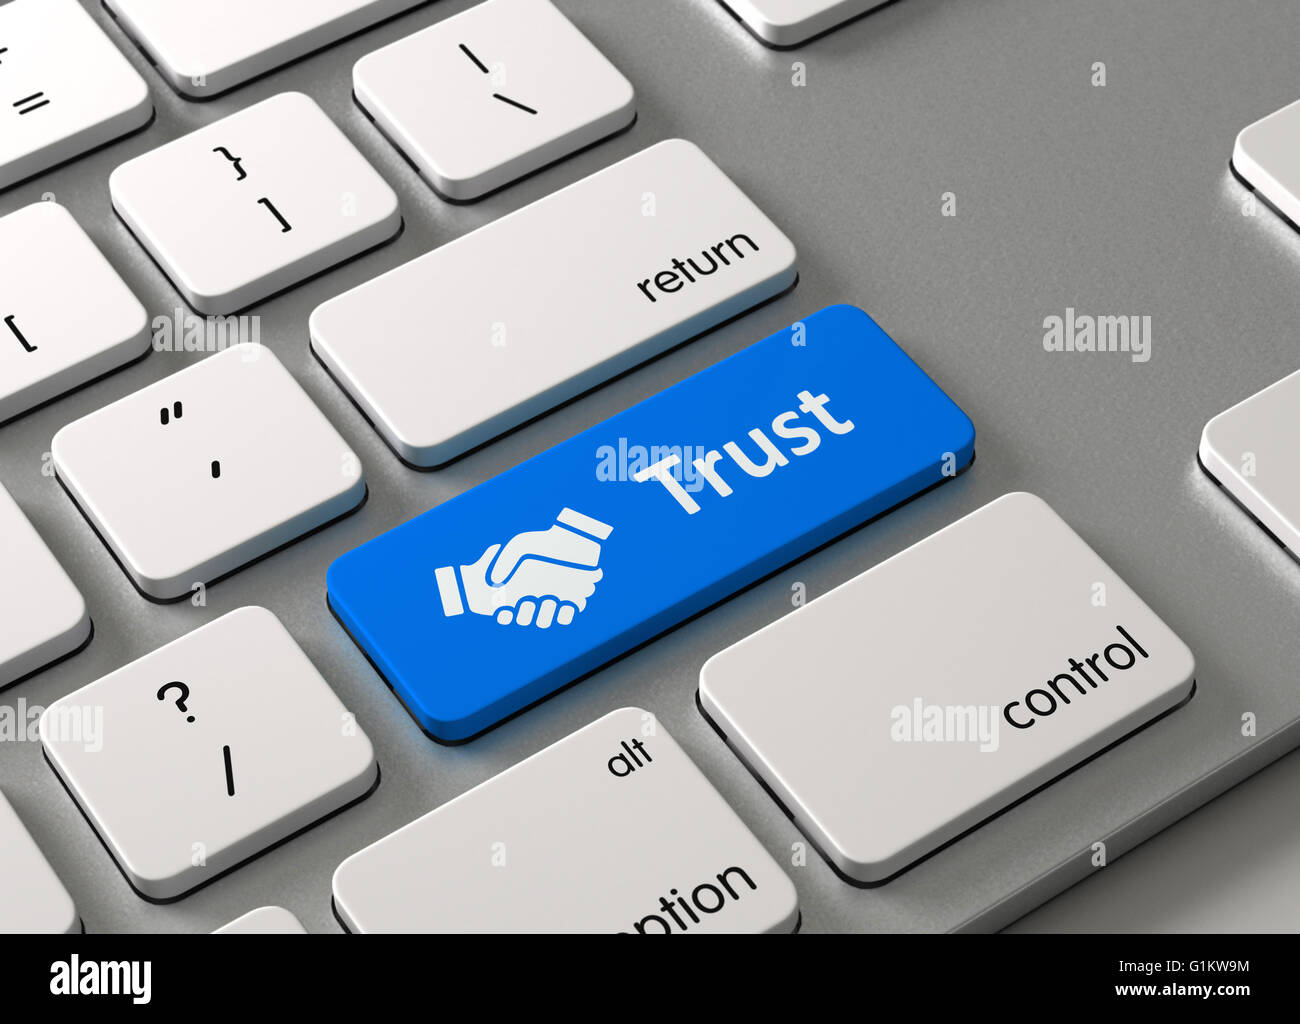 A keyboard with a blue button Trust Stock Photo